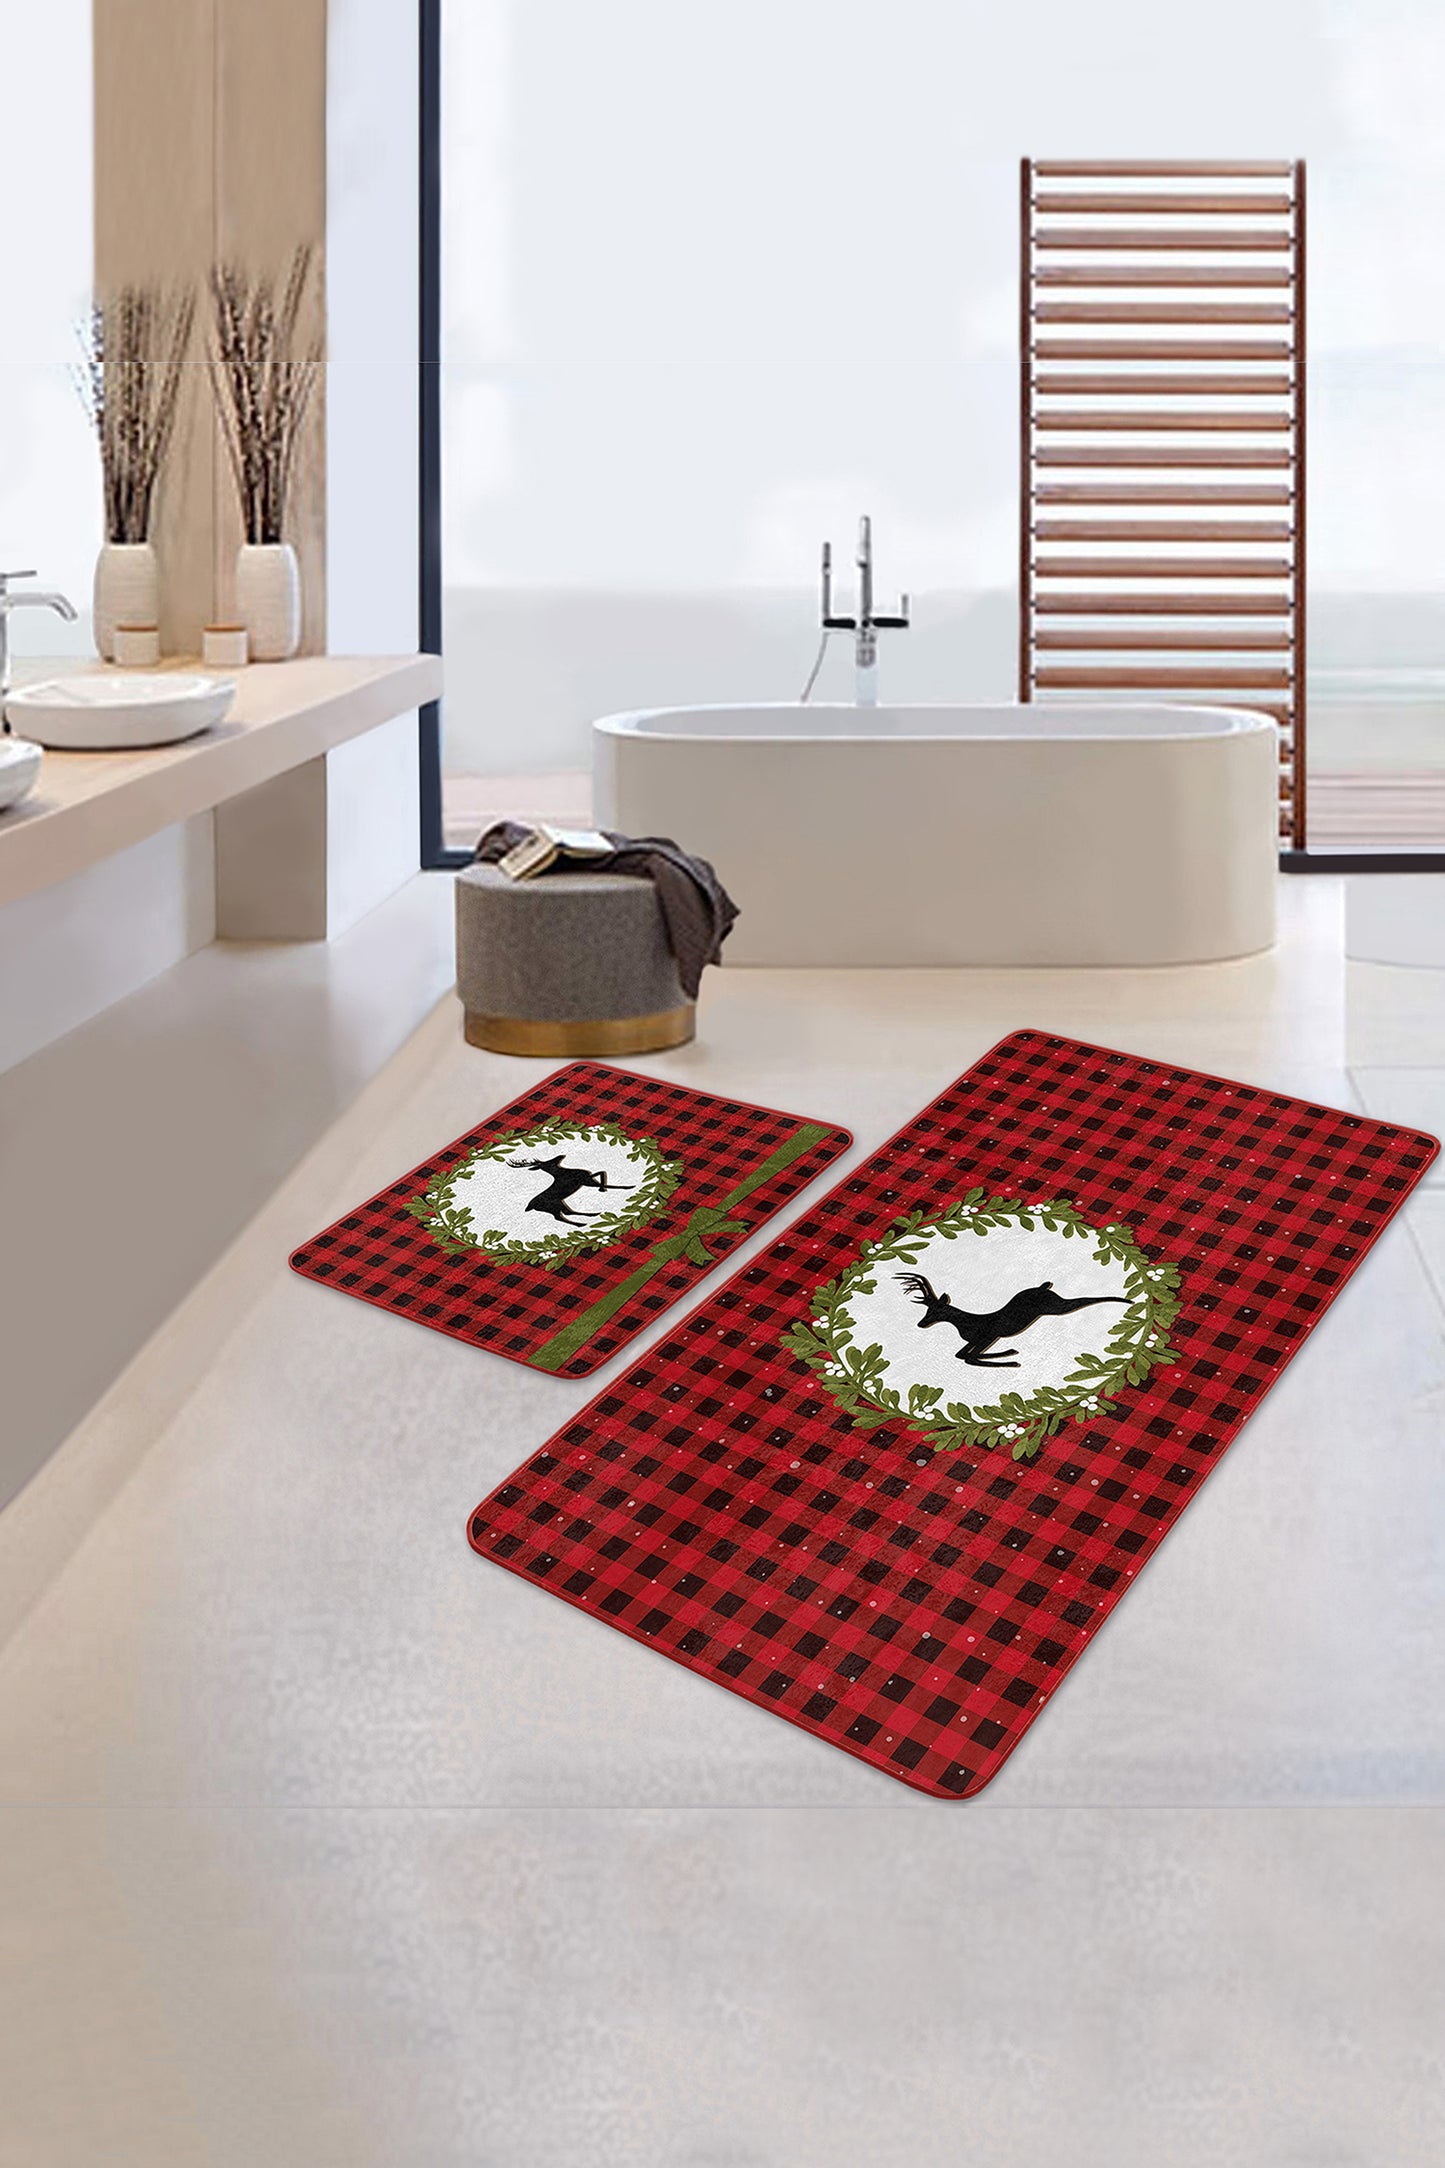 Decorative Bath Mat Set with a Charming Array of Red Christmas Patterns